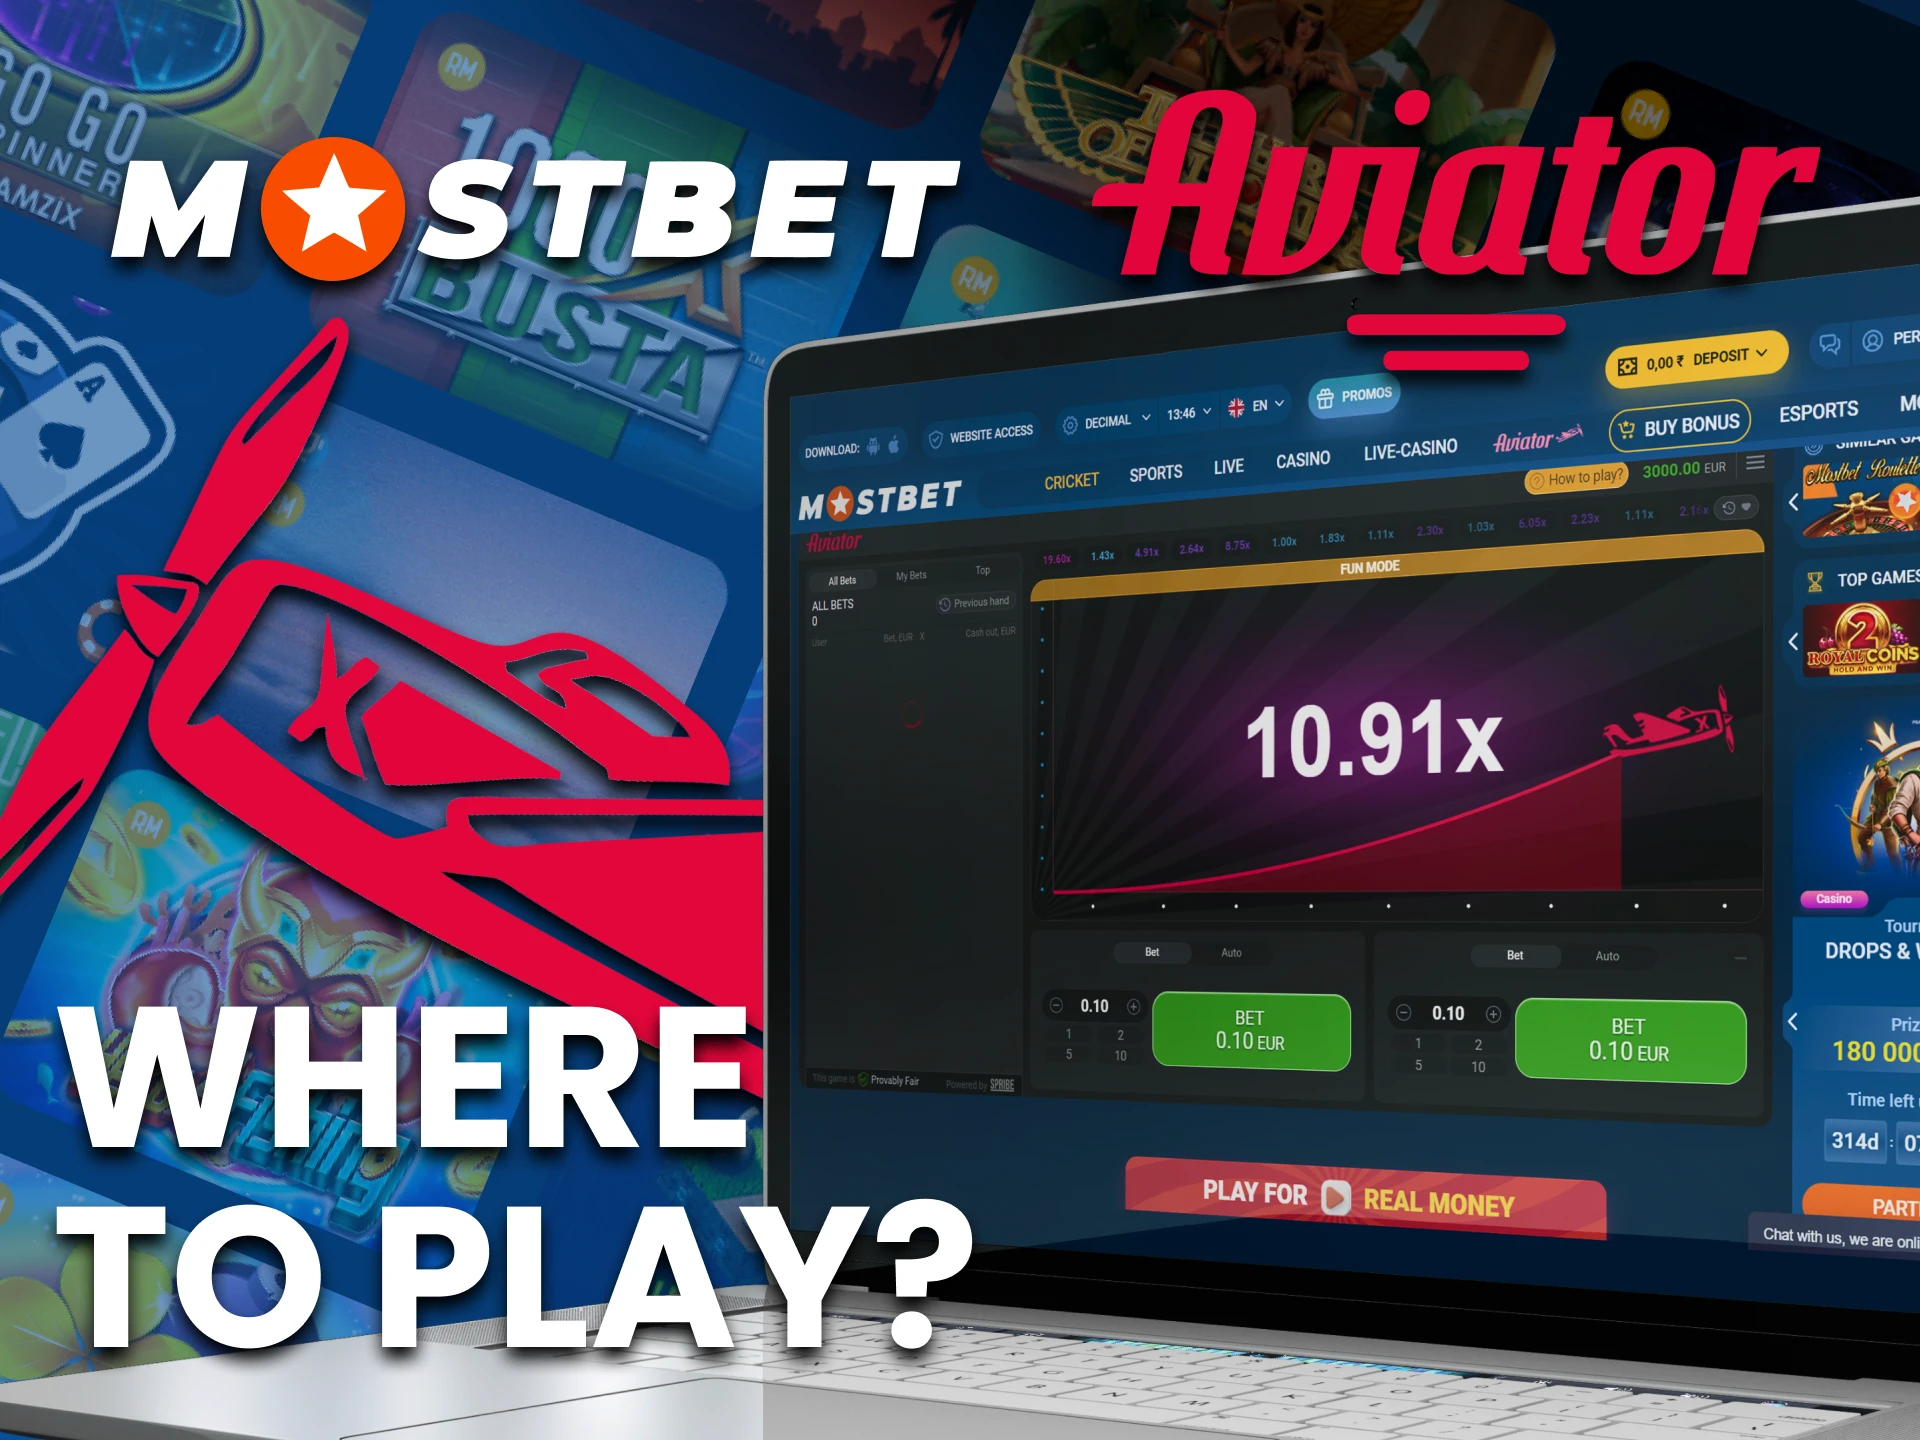 You can play Aviator on the Mostbet site.